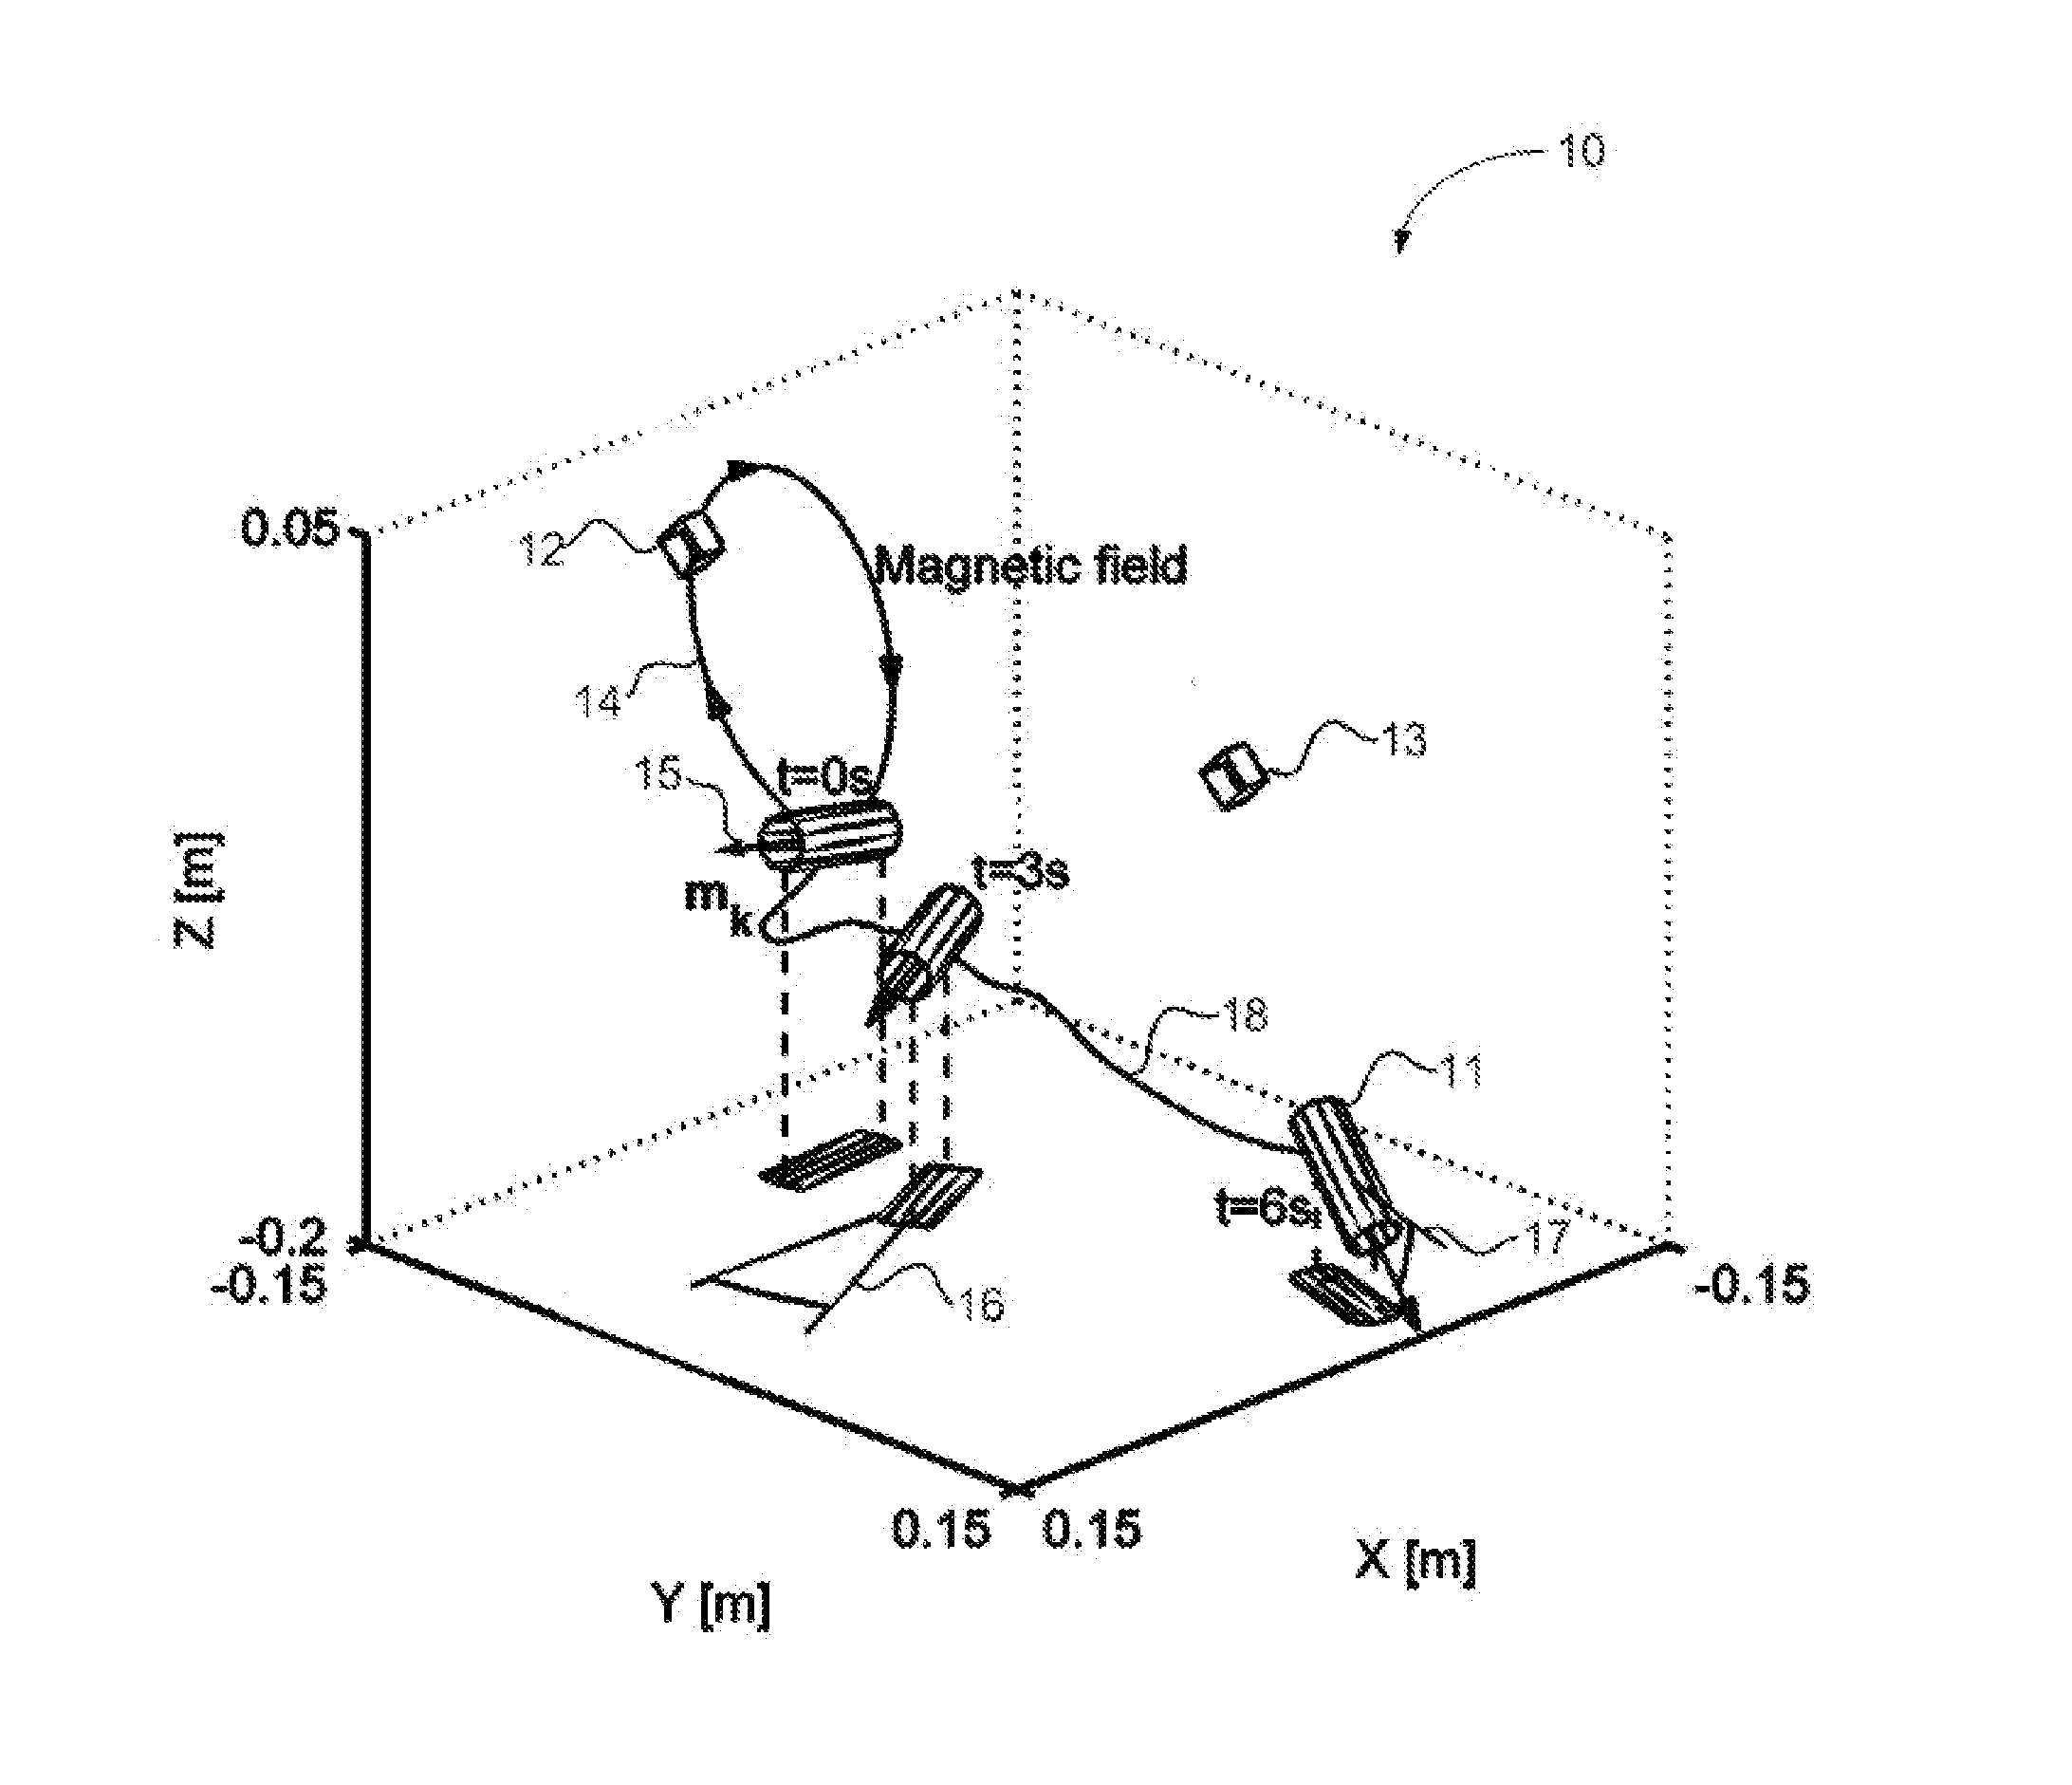 Method and Device for Pose Tracking Using Vector Magnetometers